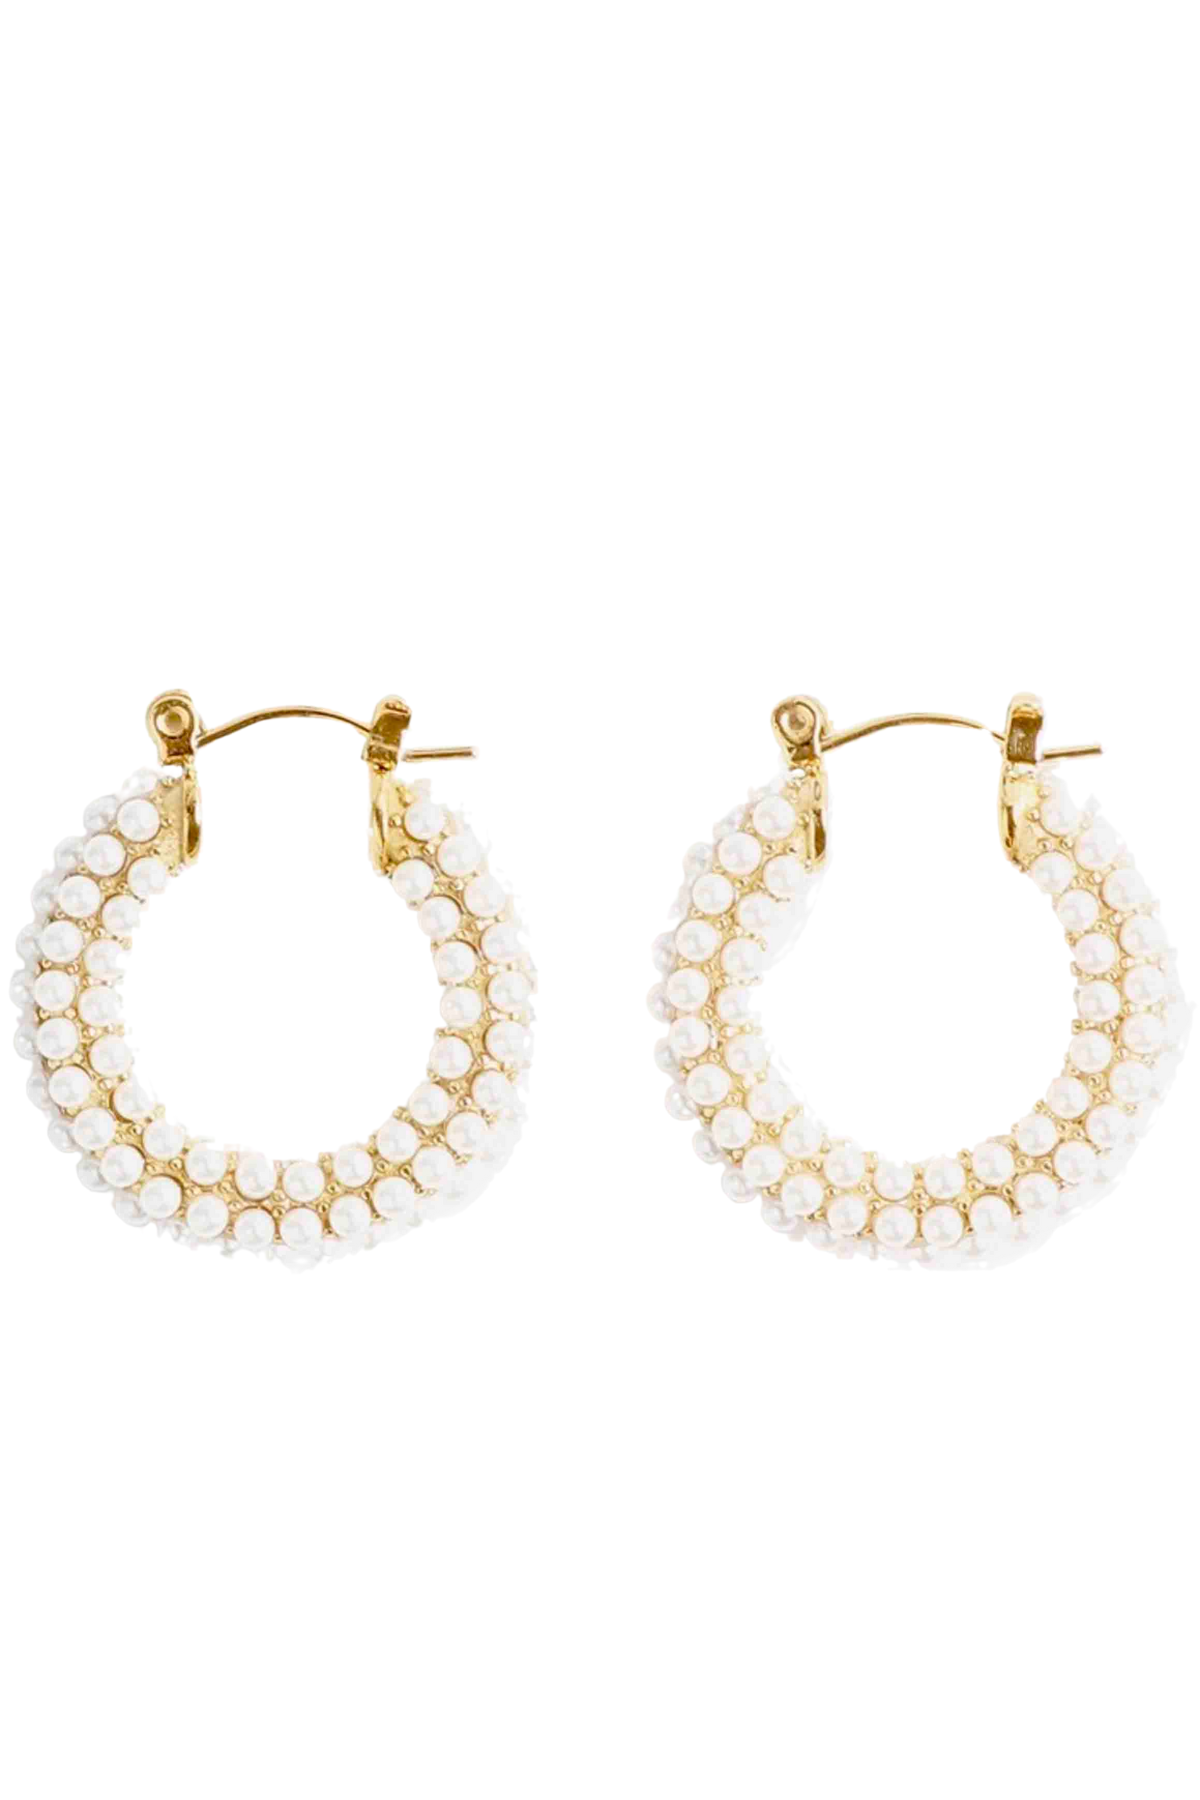 Gold Ivory Glass Pearl Audrey Hoops by Marrin Costello